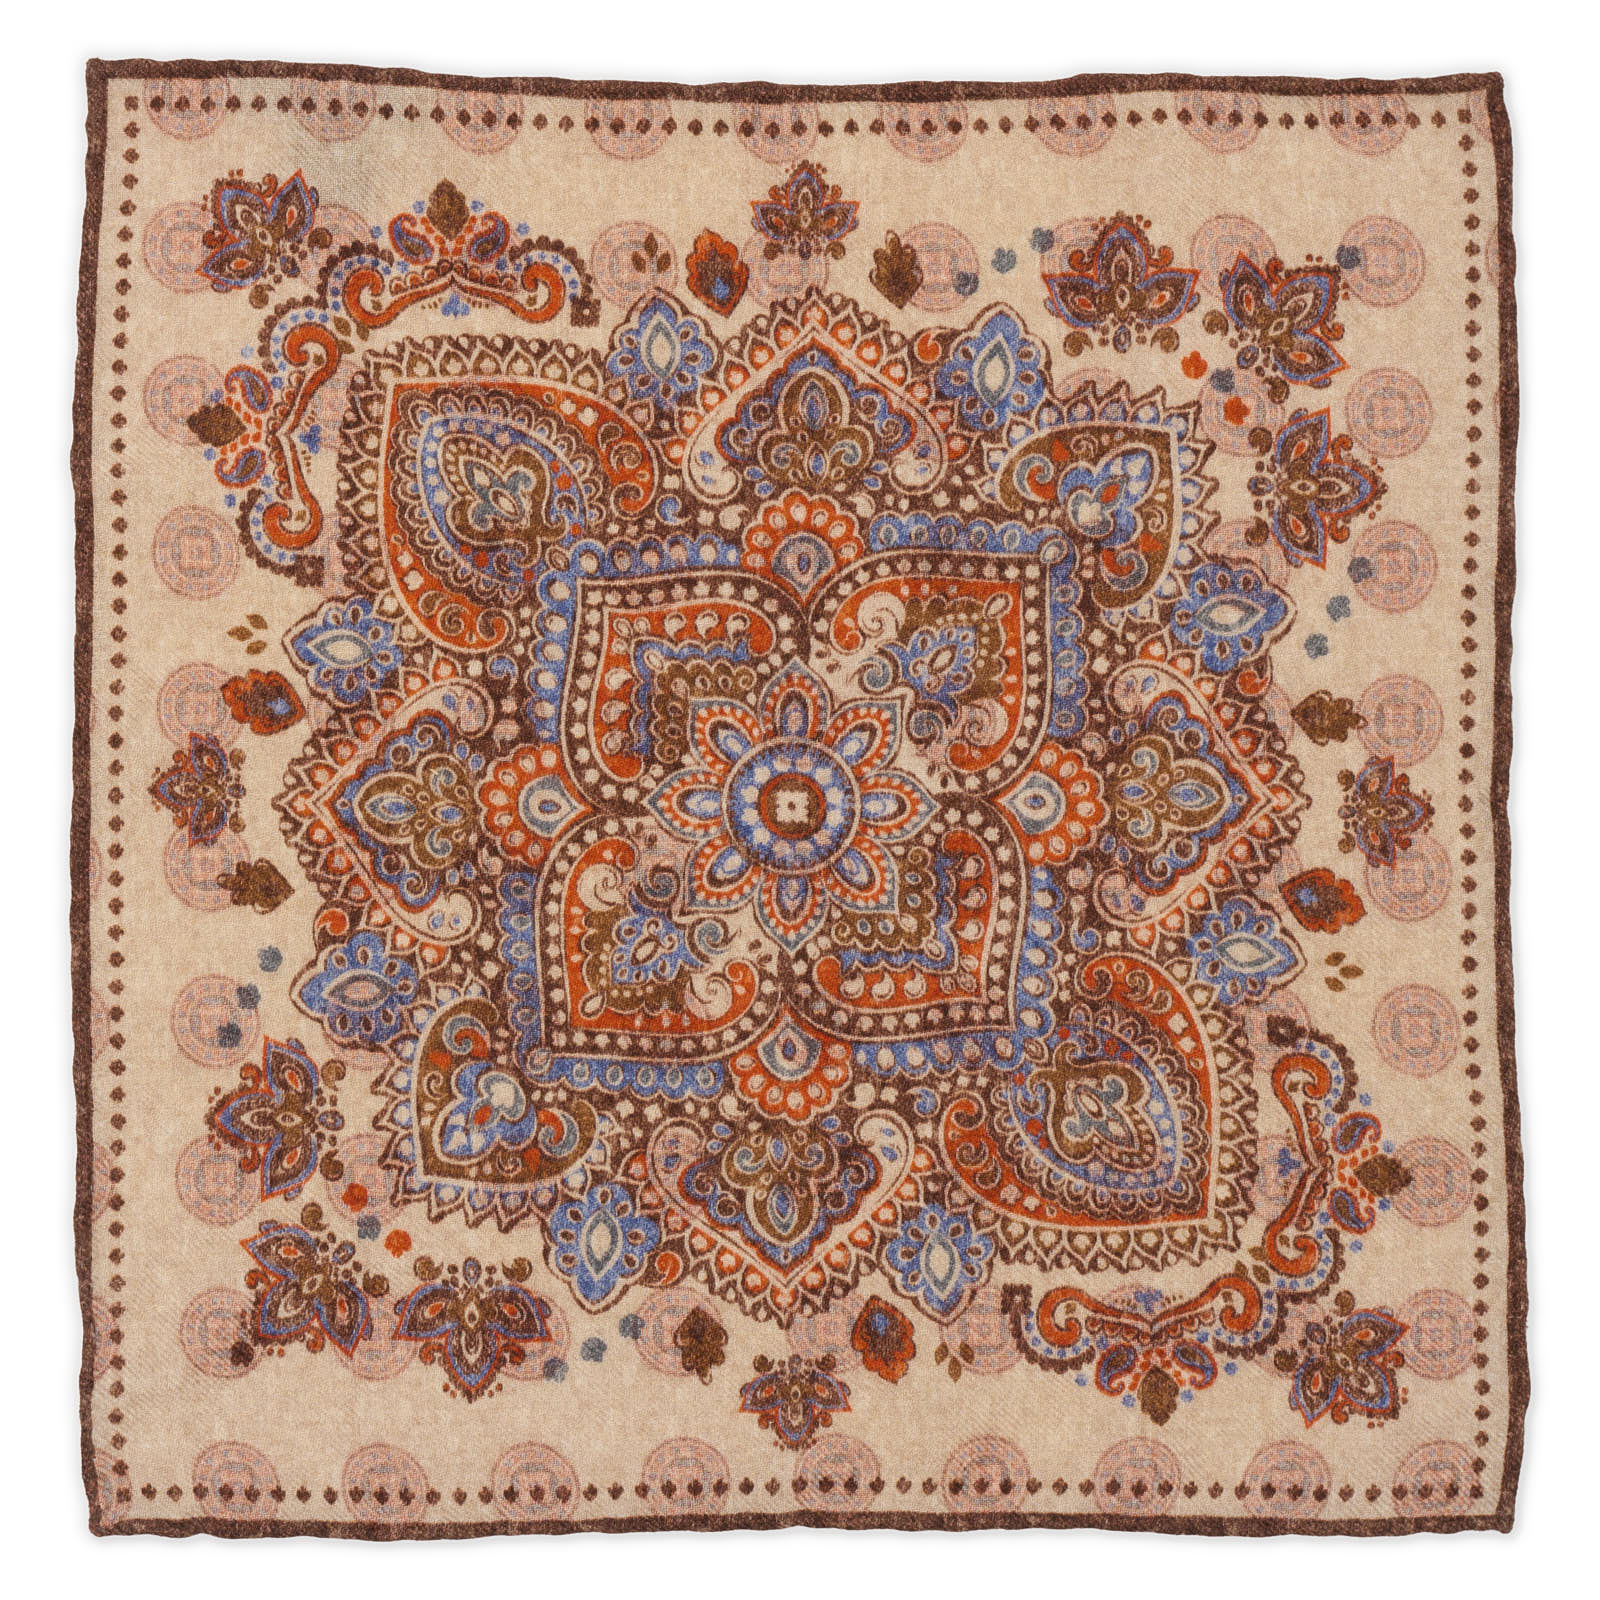 ROSI Handmade Multicolor Floral-Medallion Wool Pocket Square Double Sided